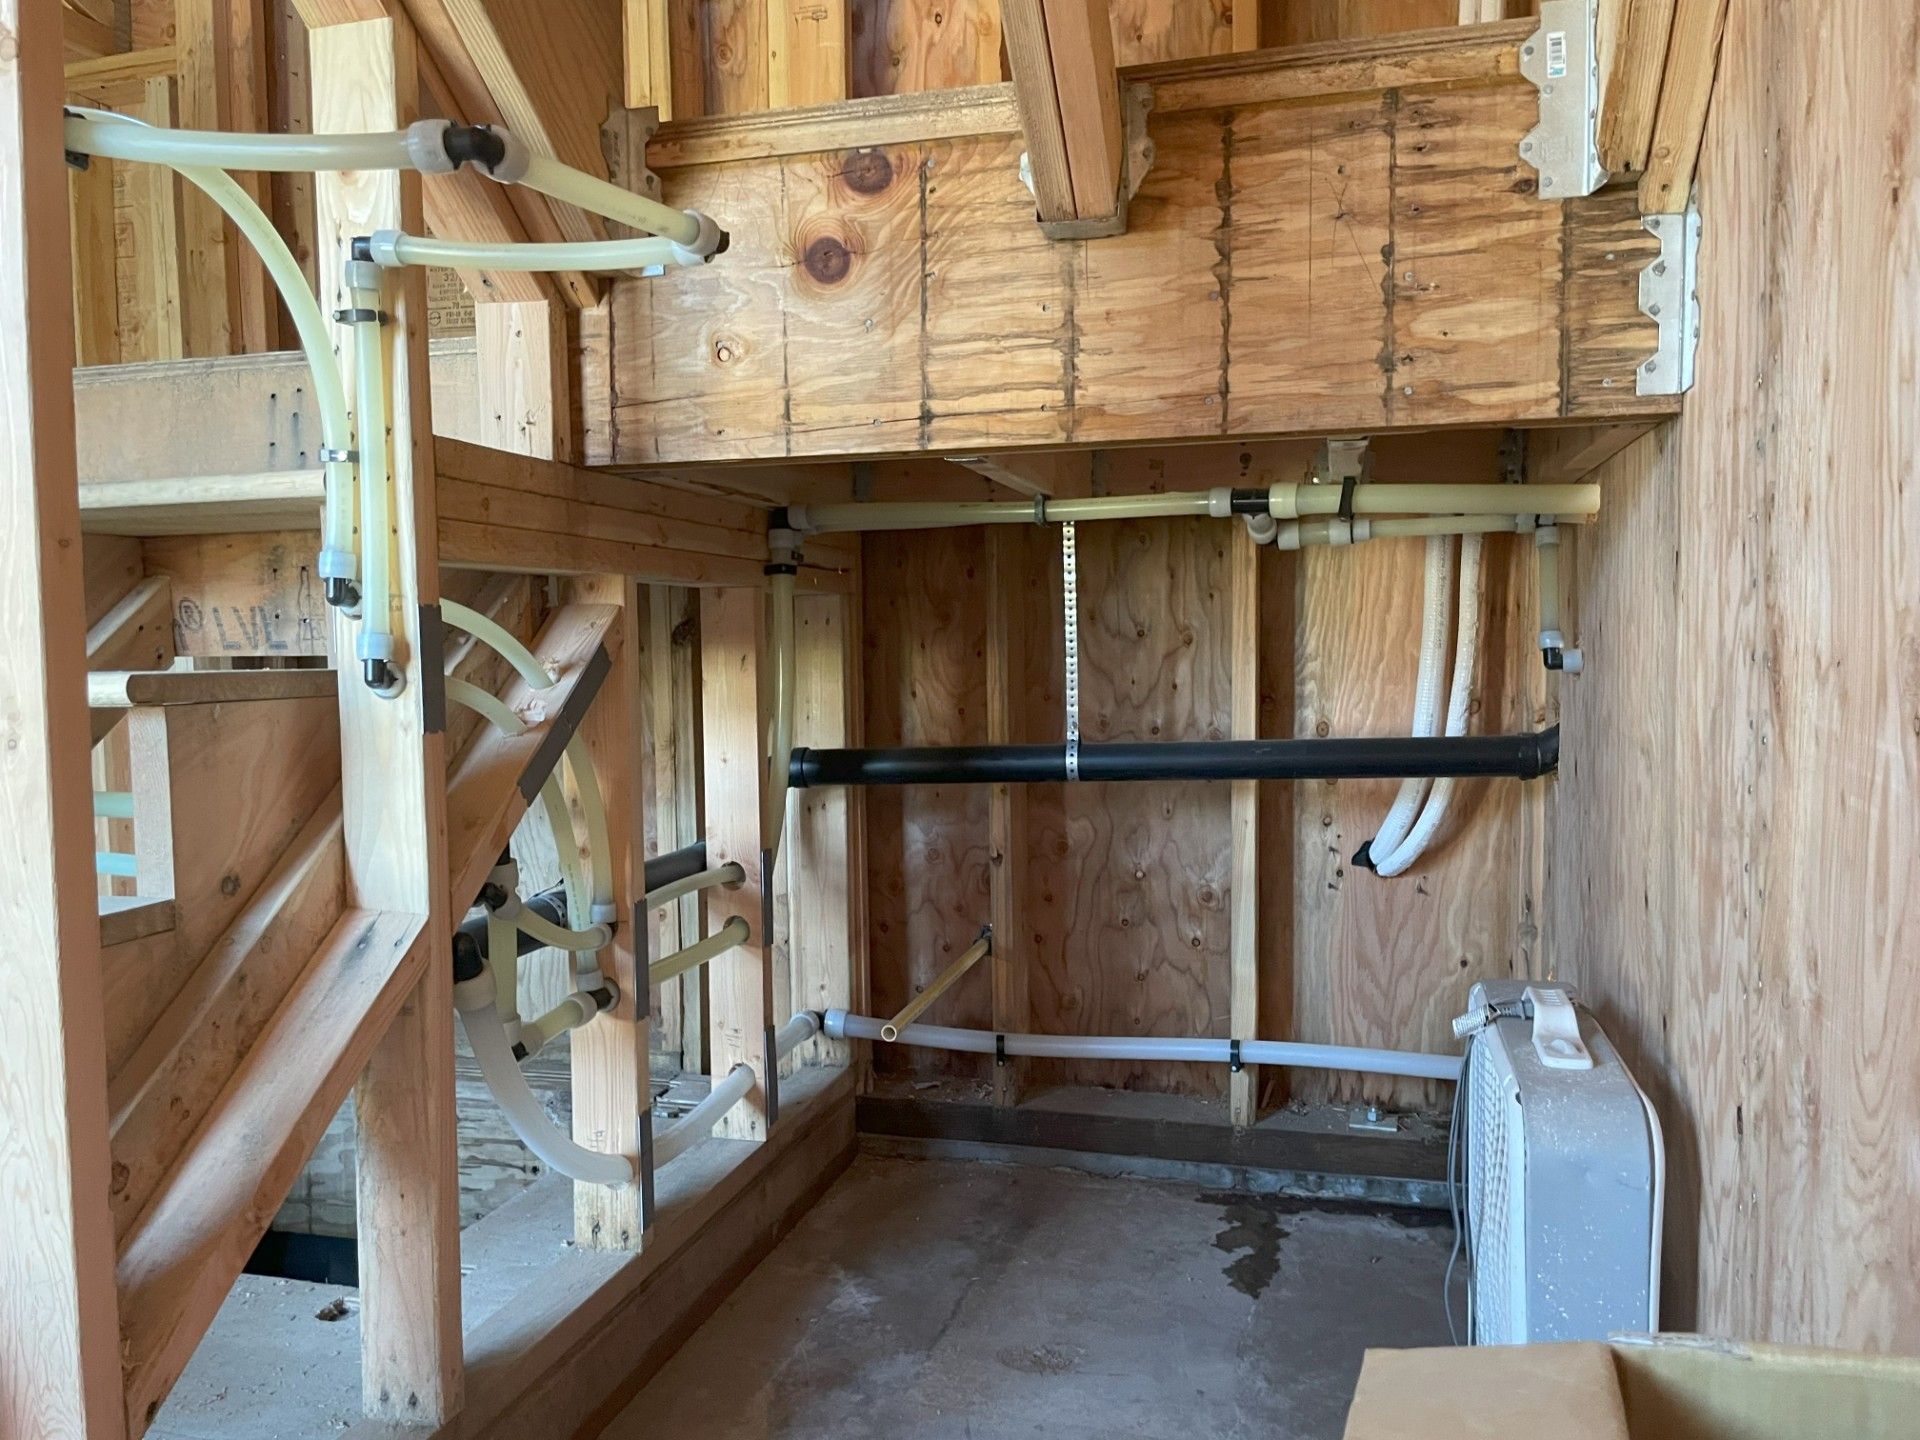 A room with a lot of drainage and plumbing pipes in it due to a rough in installation by Royal Flush Plumbing in Tacoma WA